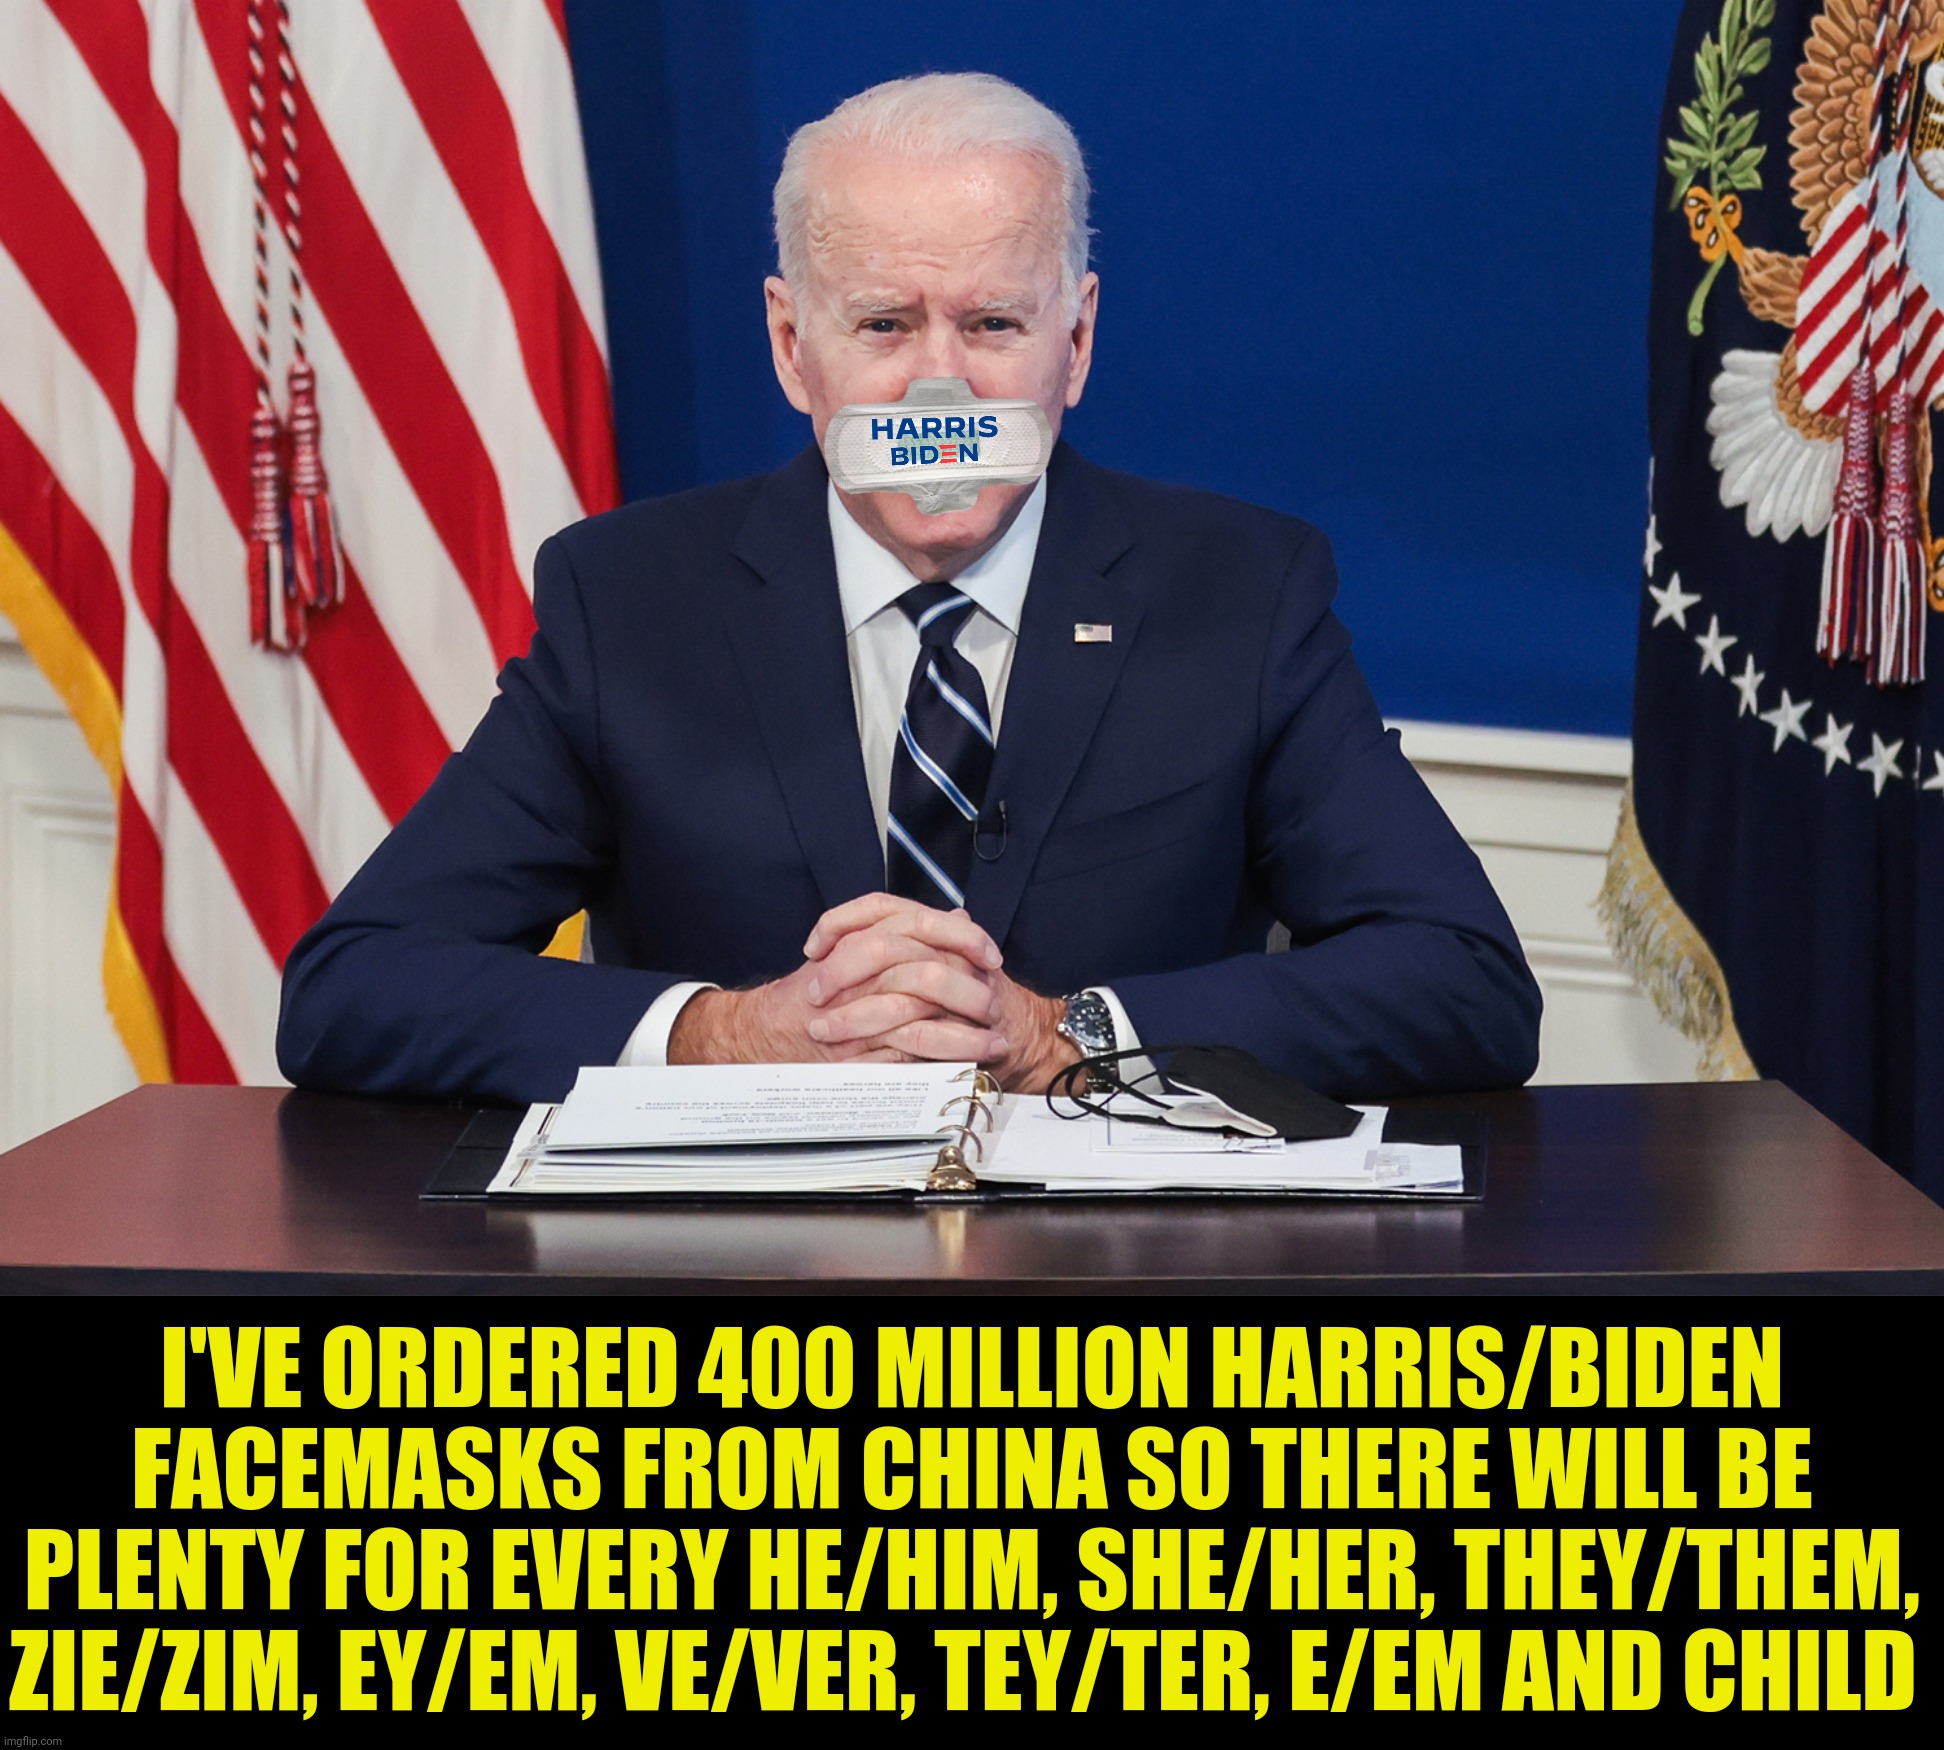 I'VE ORDERED 400 MILLION HARRIS/BIDEN FACEMASKS FROM CHINA SO THERE WILL BE PLENTY FOR EVERY HE/HIM, SHE/HER, THEY/THEM, ZIE/ZIM, EY/EM, VE/ | made w/ Imgflip meme maker